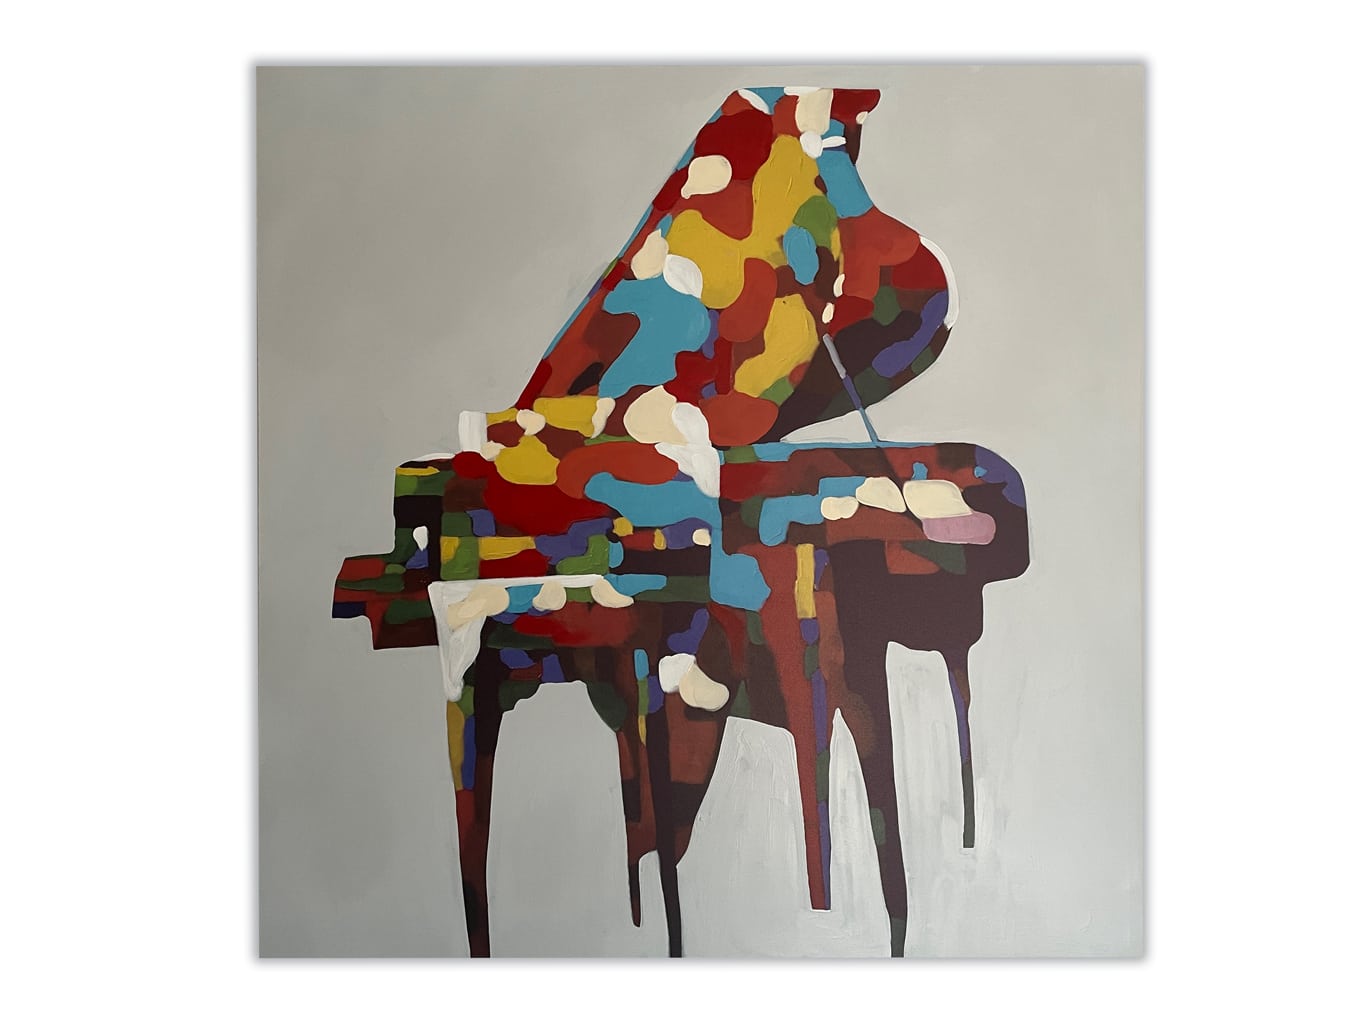 Piano Abstract Painting in Colour on Canvas